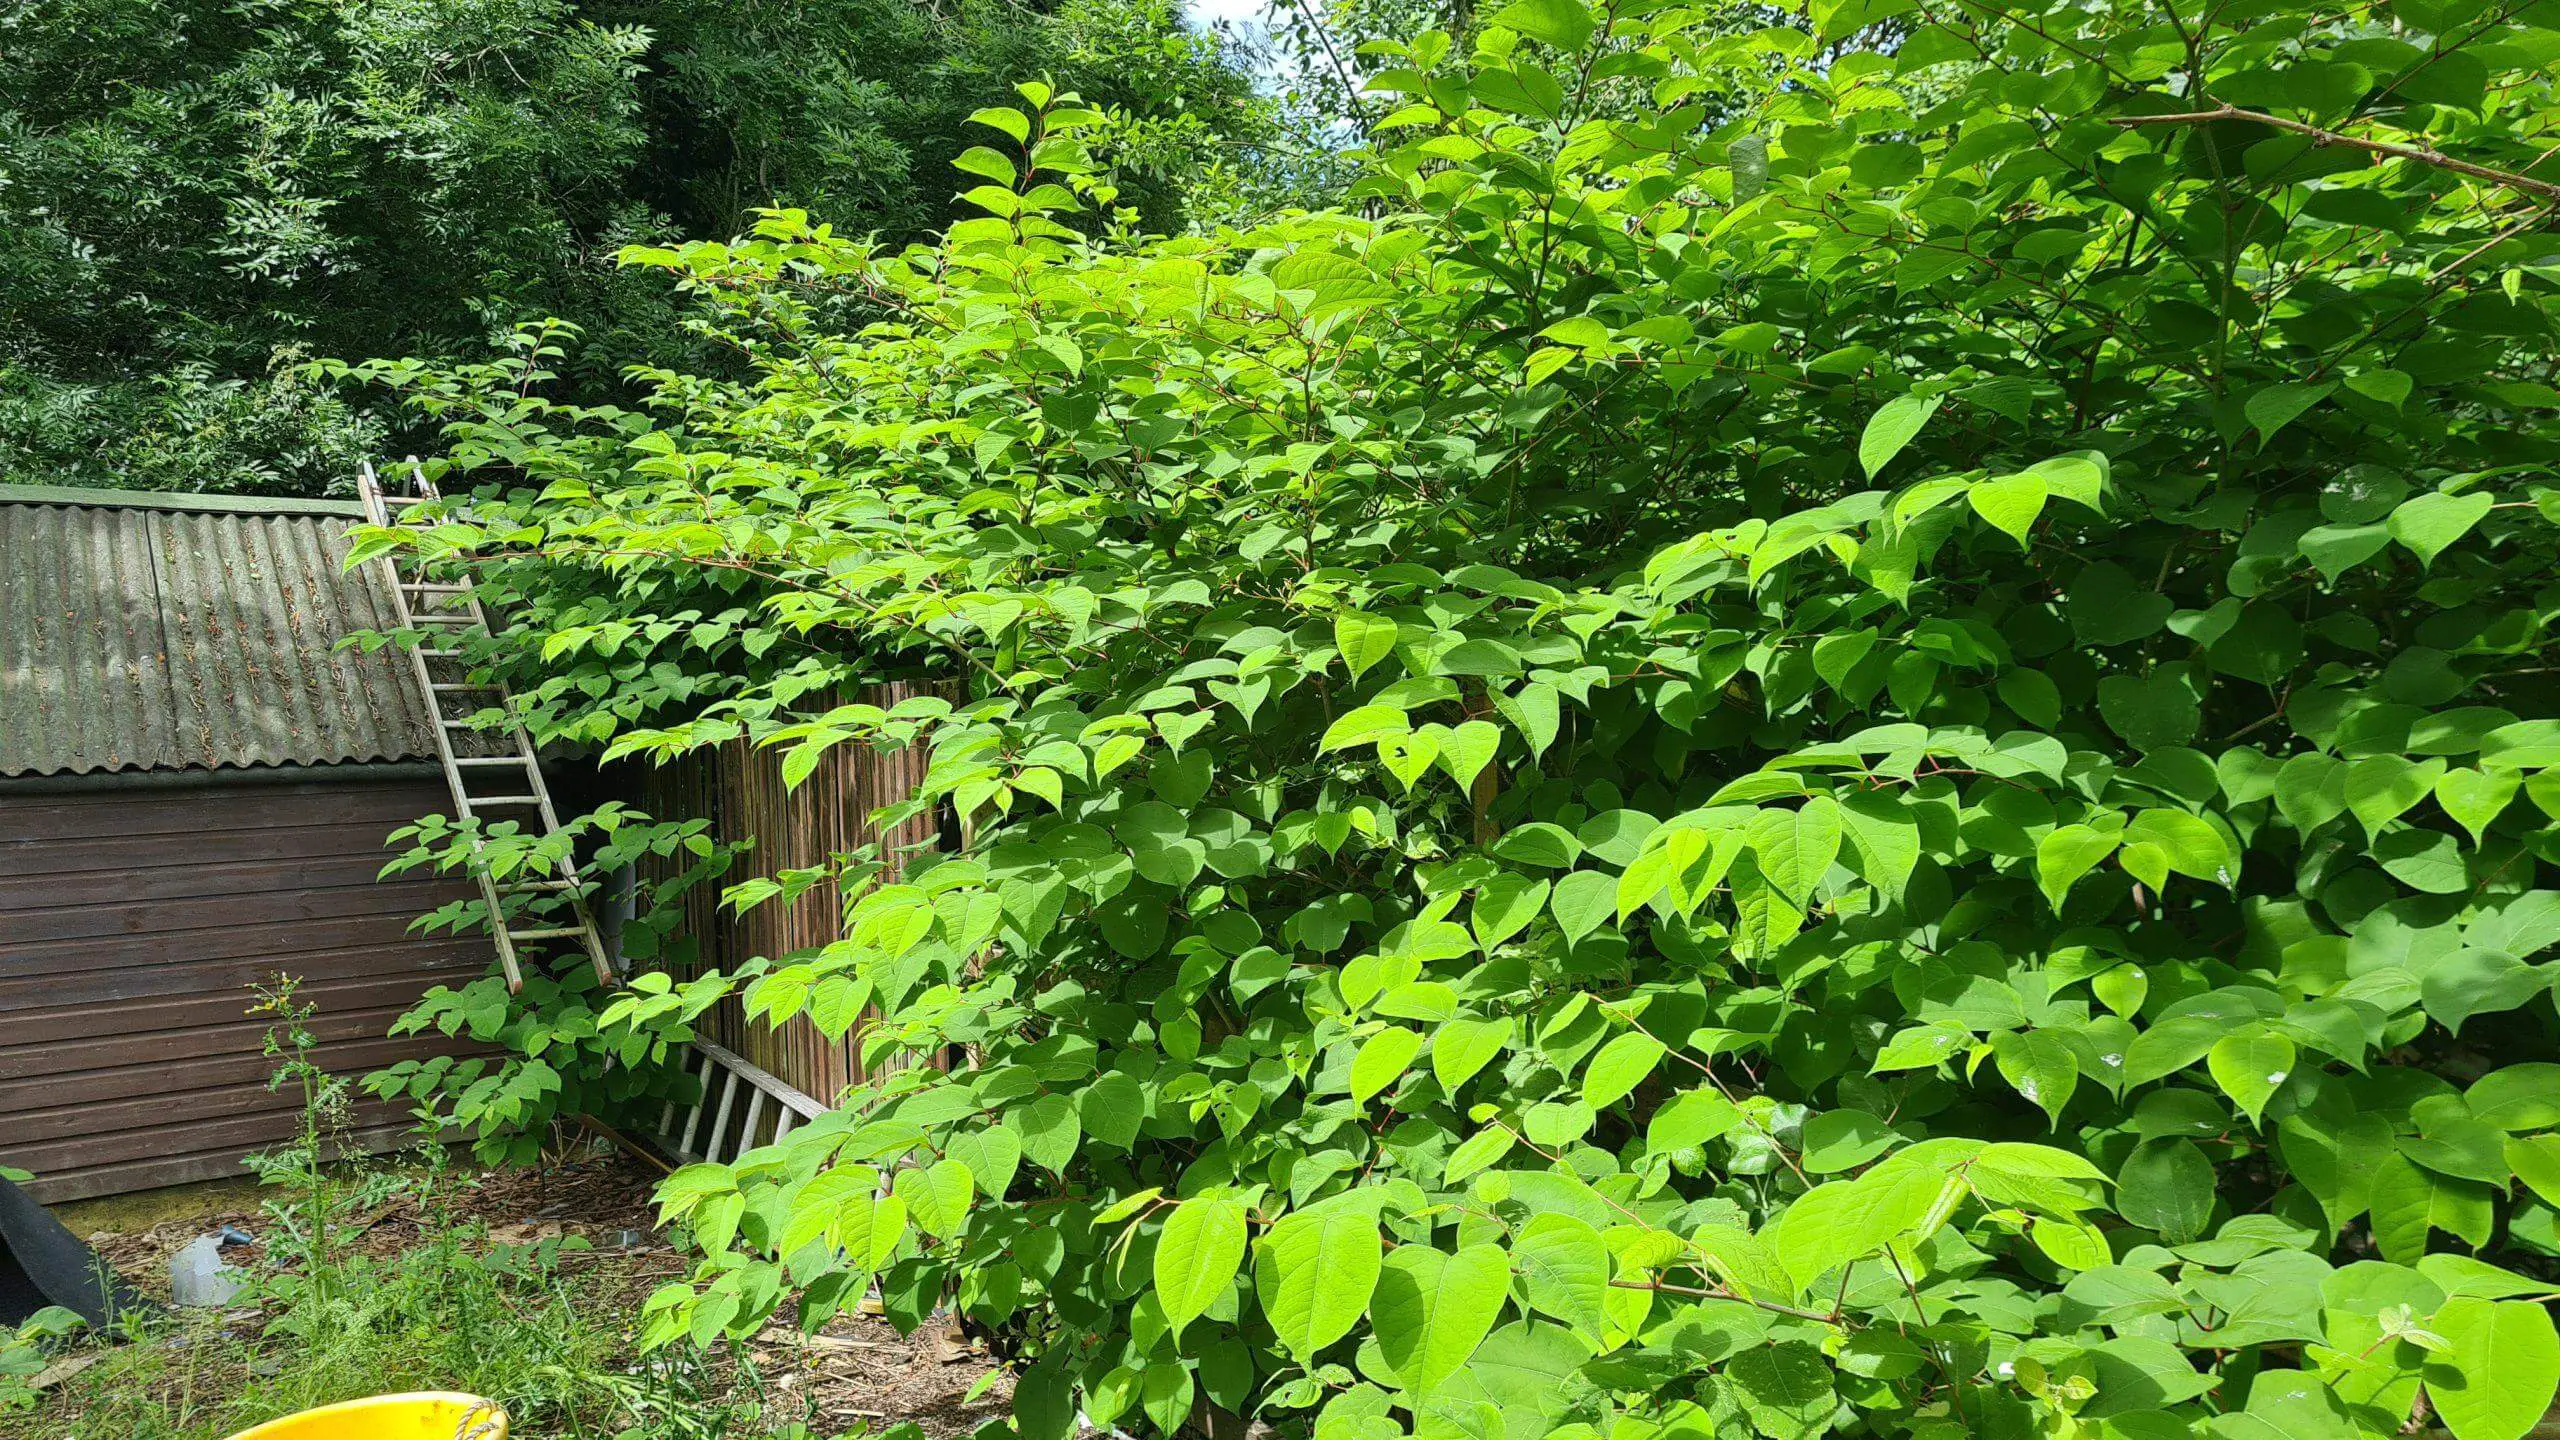 Japanese knotweed invading a property from a neighbouring property which can lead to legal issues